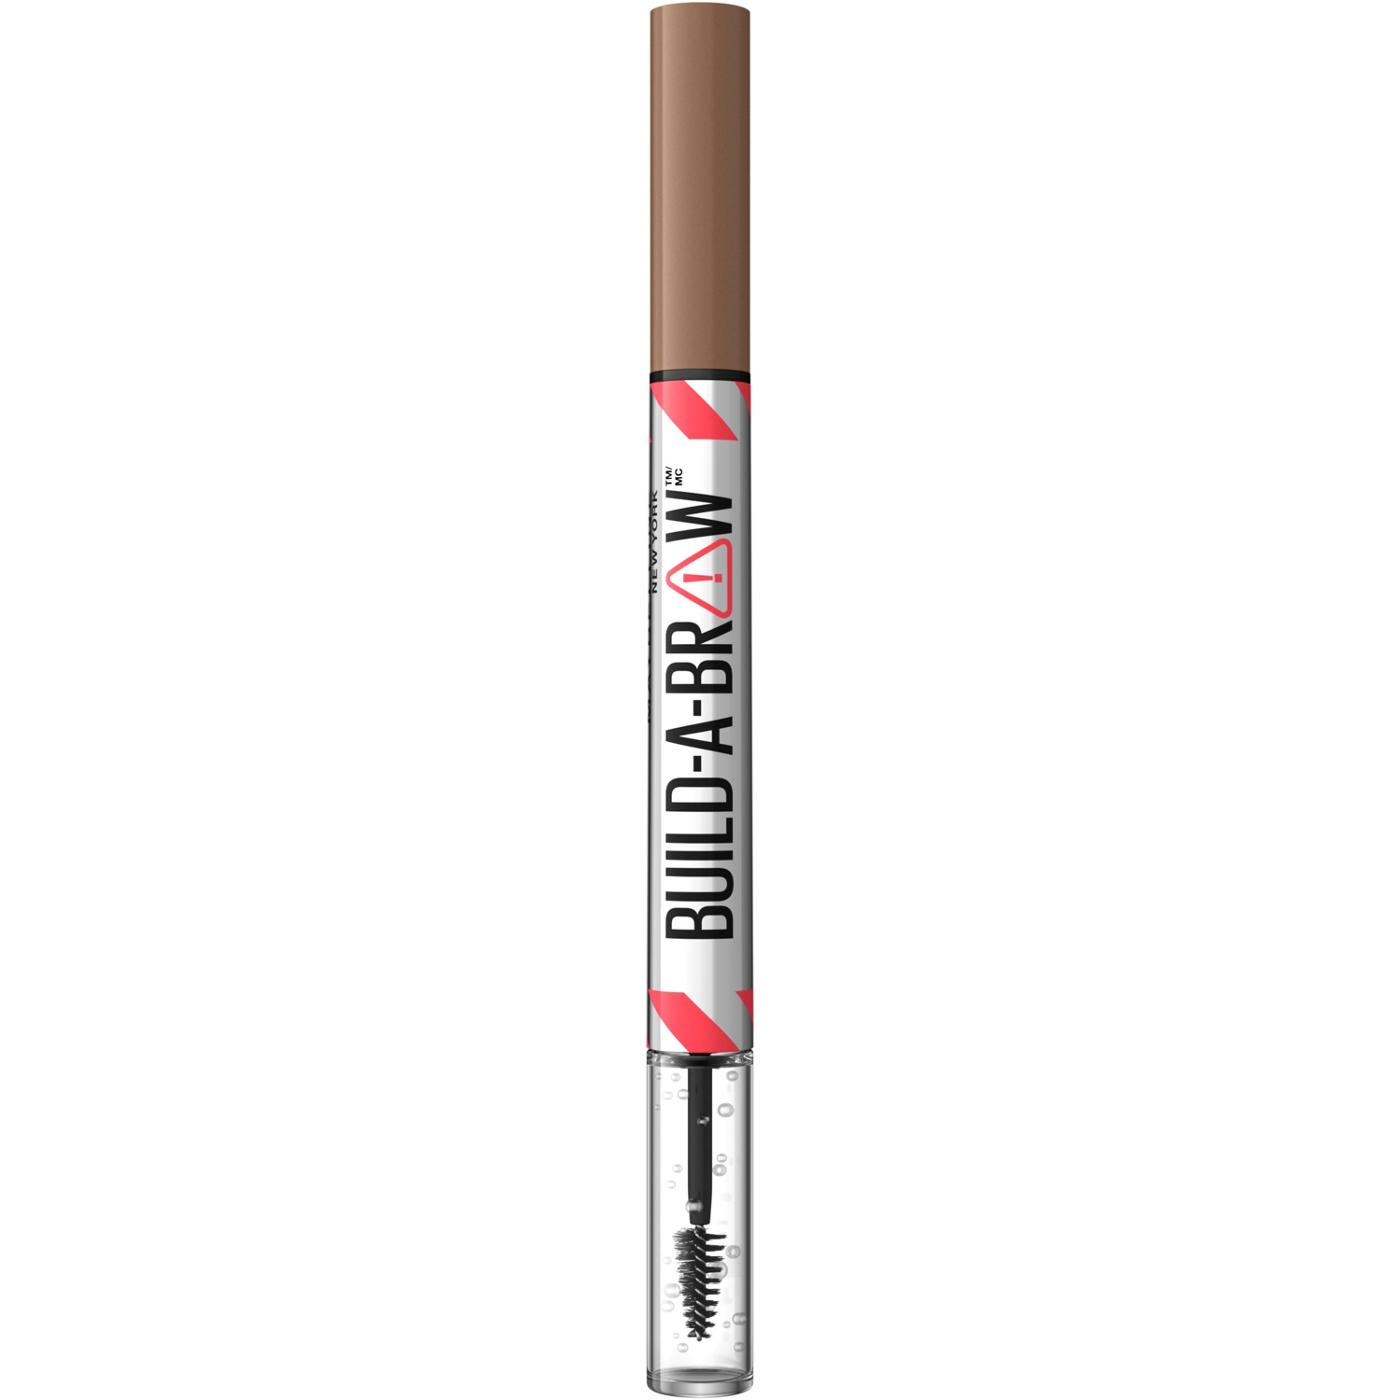 Maybelline Build A Brow 2 In 1 Brow Pen - Soft Brown; image 8 of 16